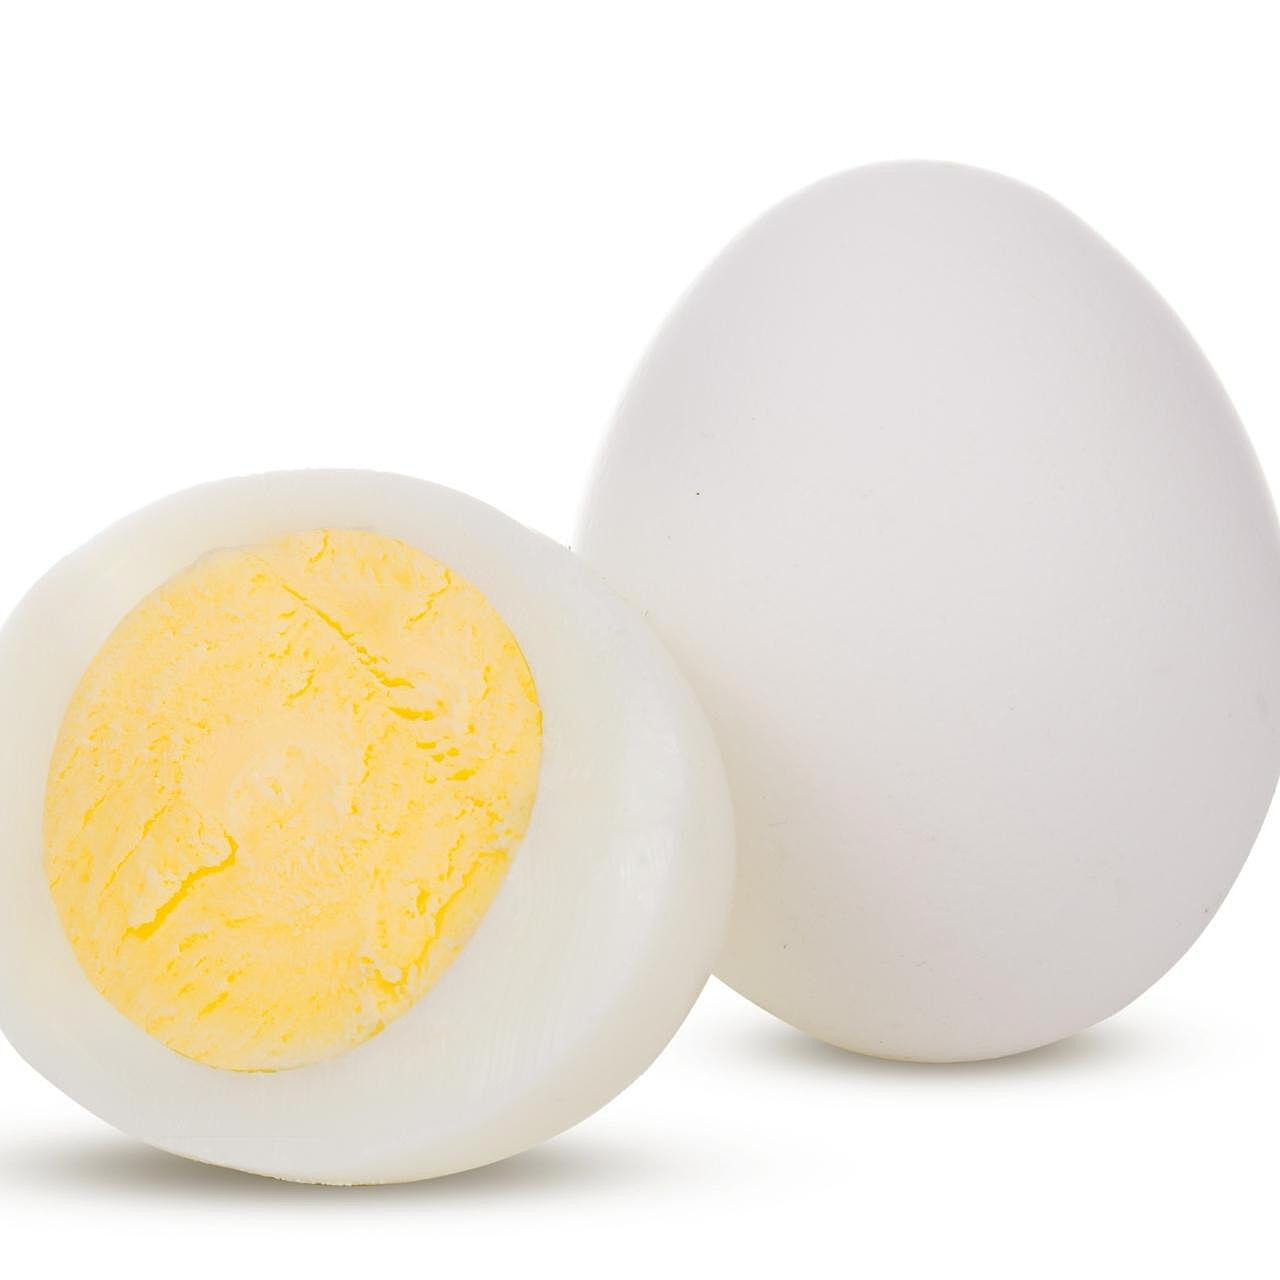 Two white and brown eggs art, Peeled Hard Boiled Eggs transparent